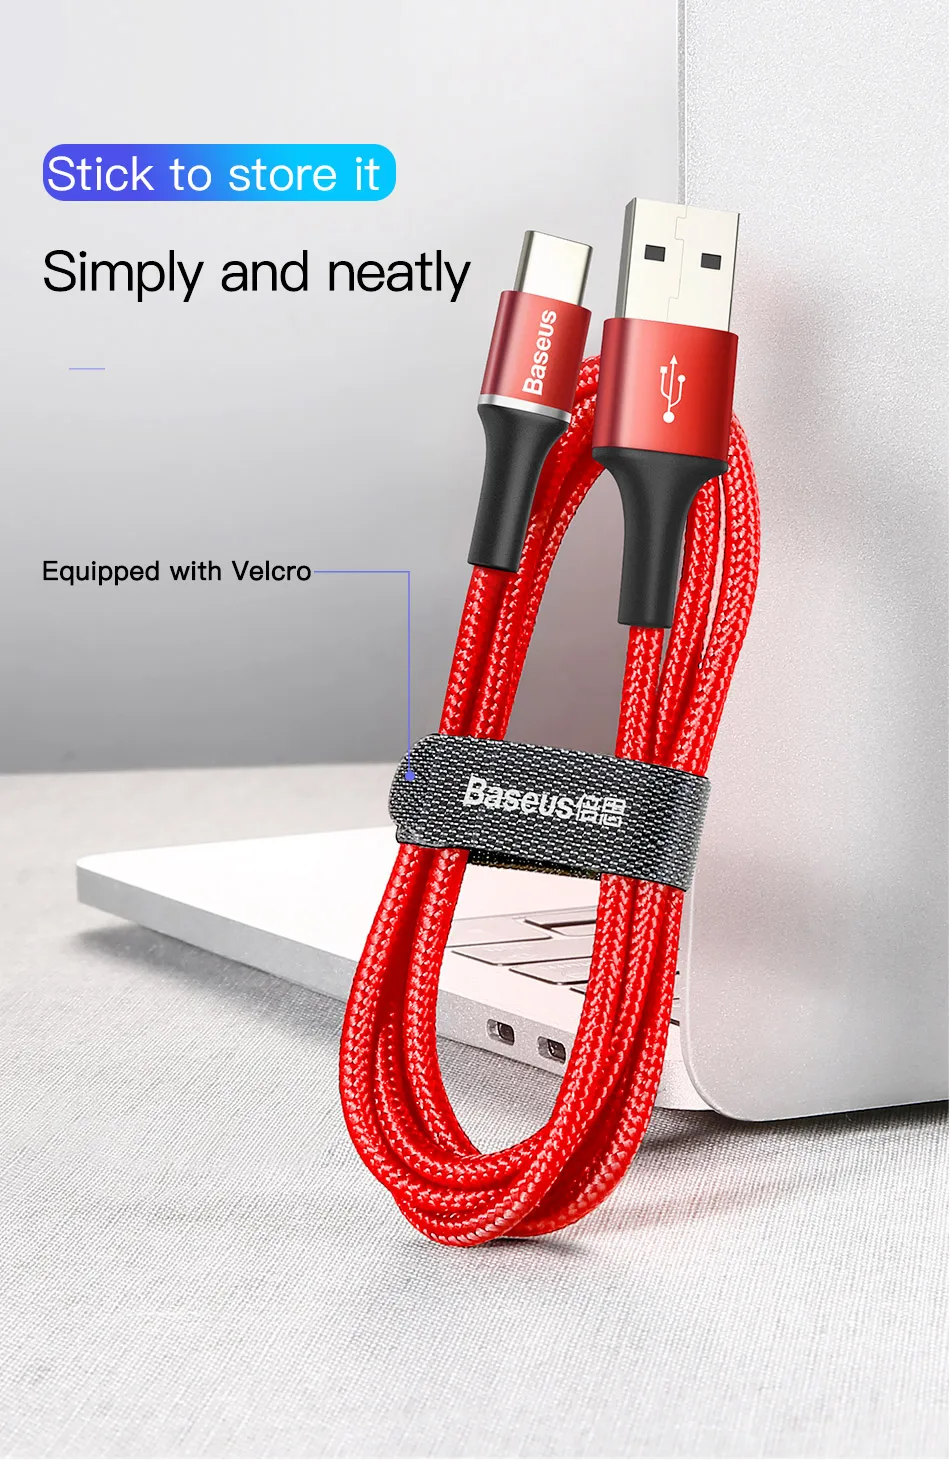 Baseus USB Type C Cable For All Smartphones